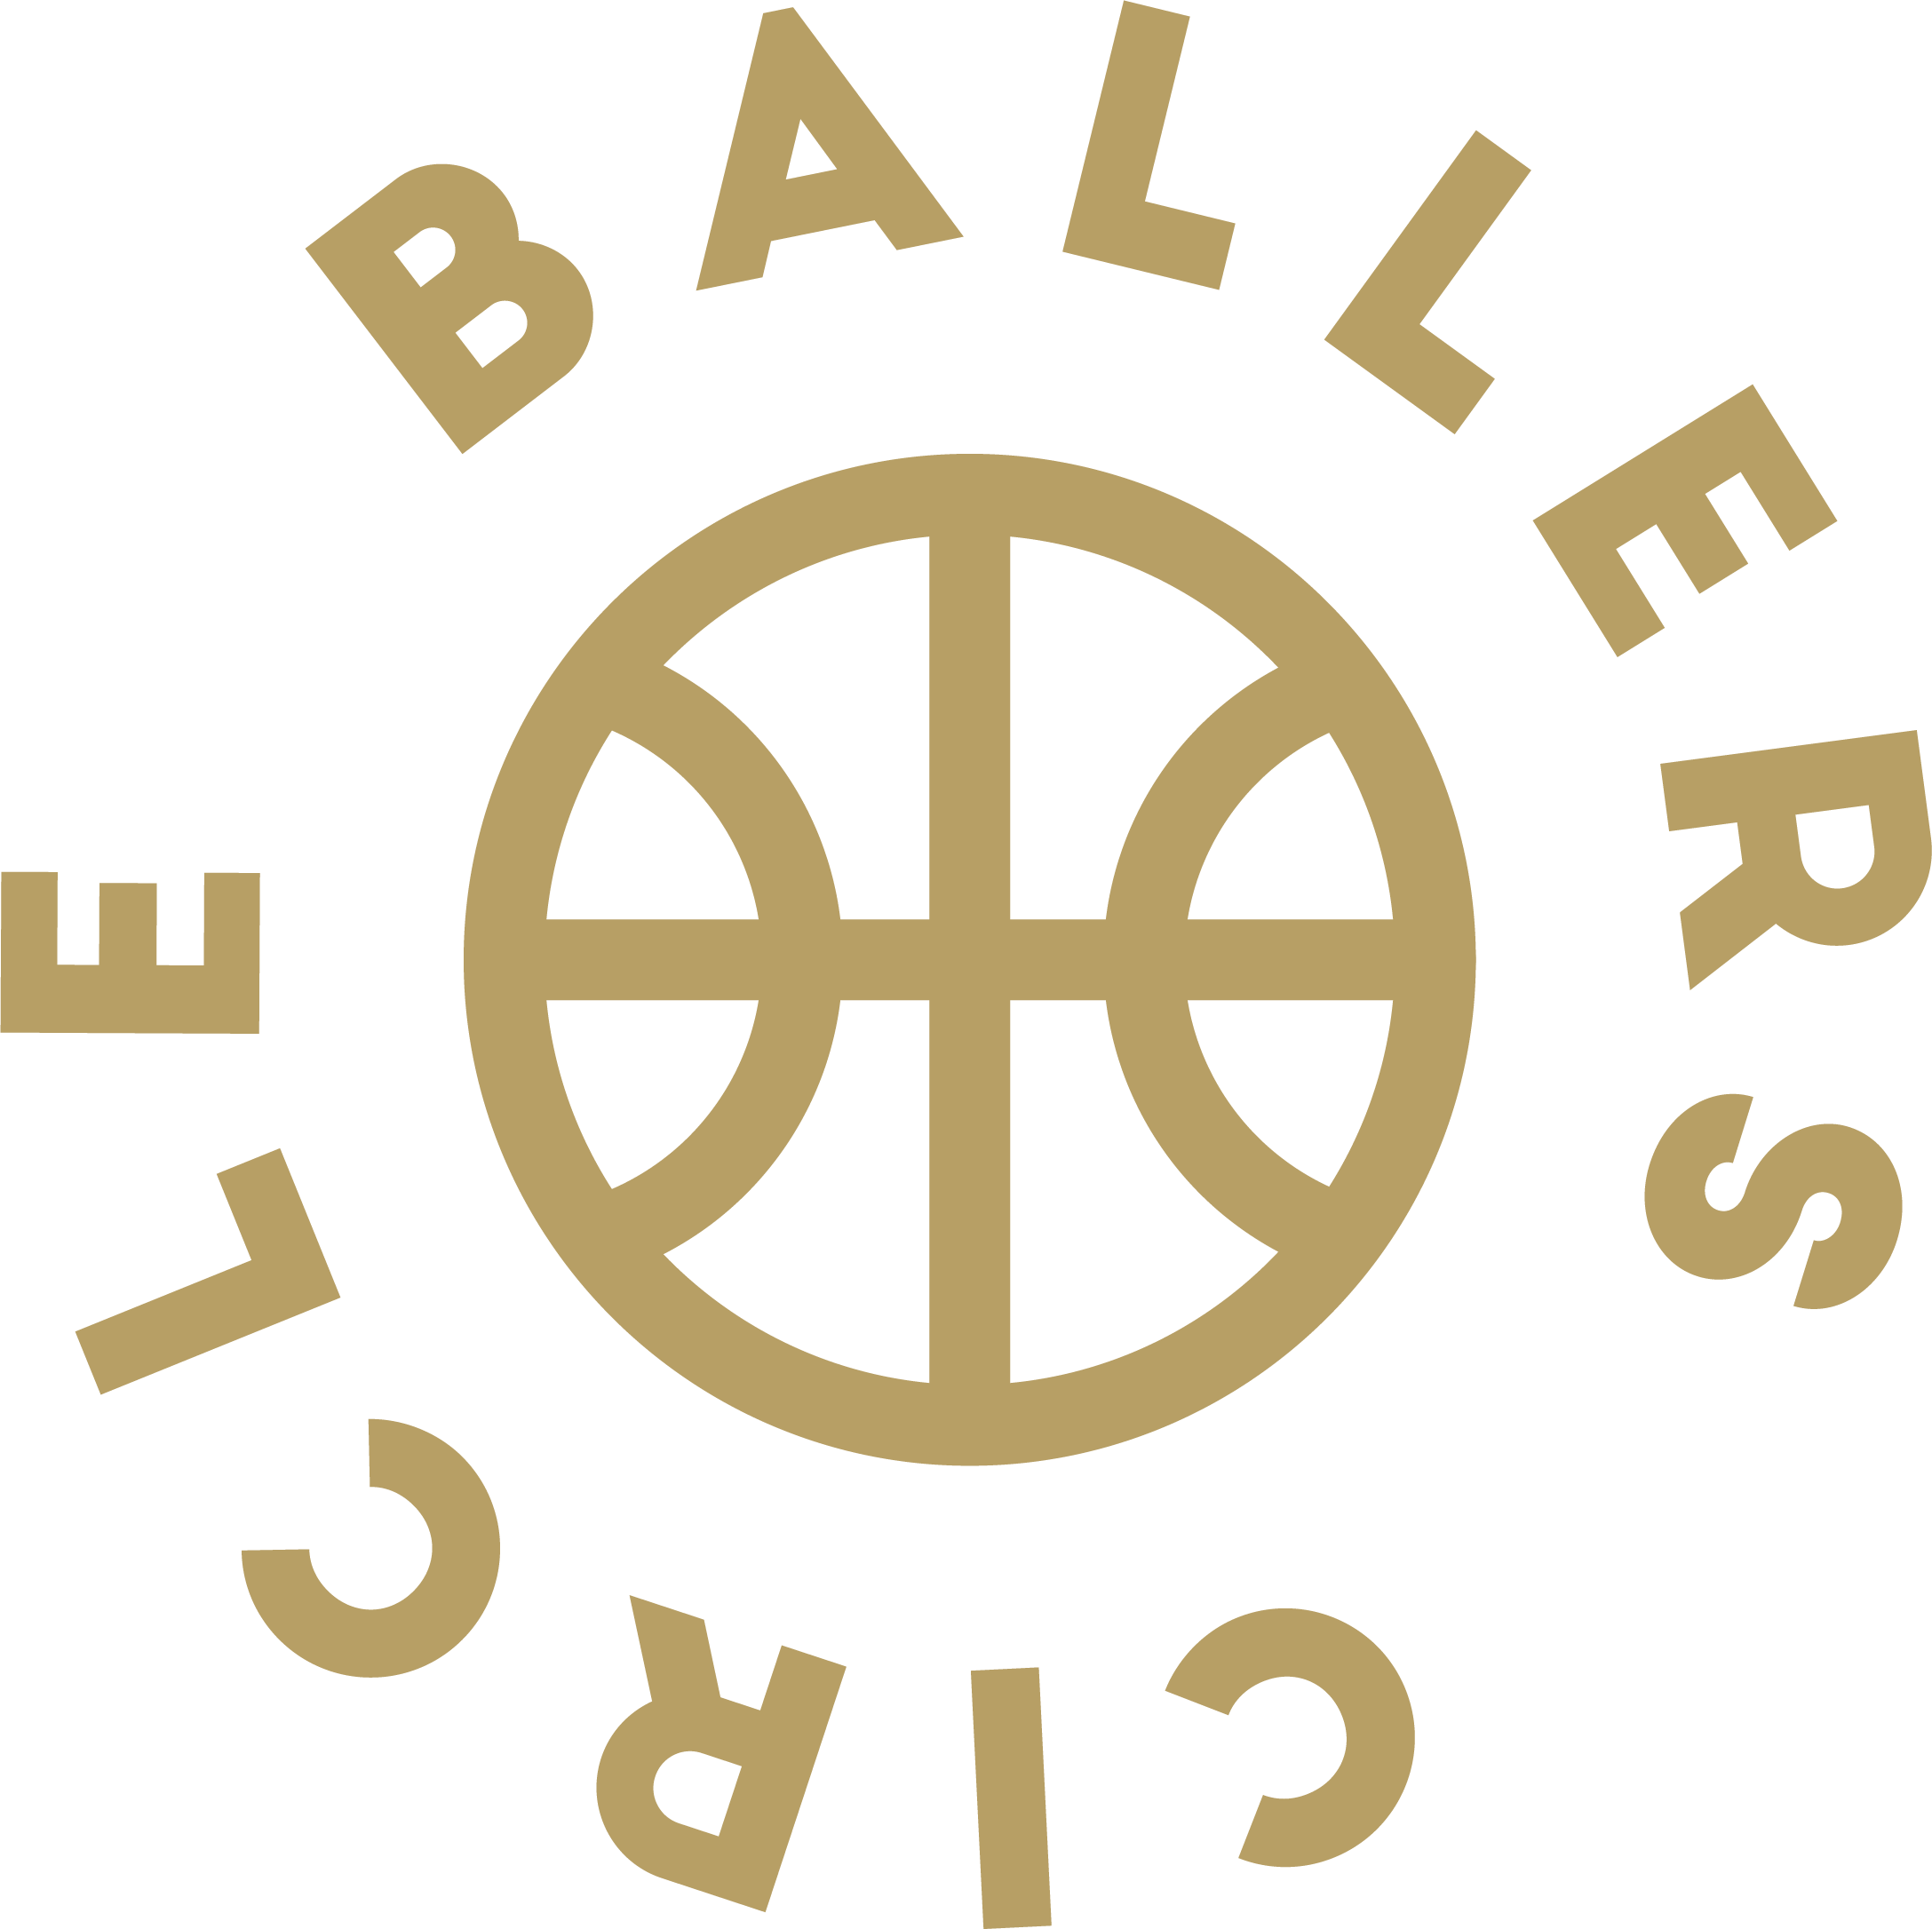 The Ballers Circle